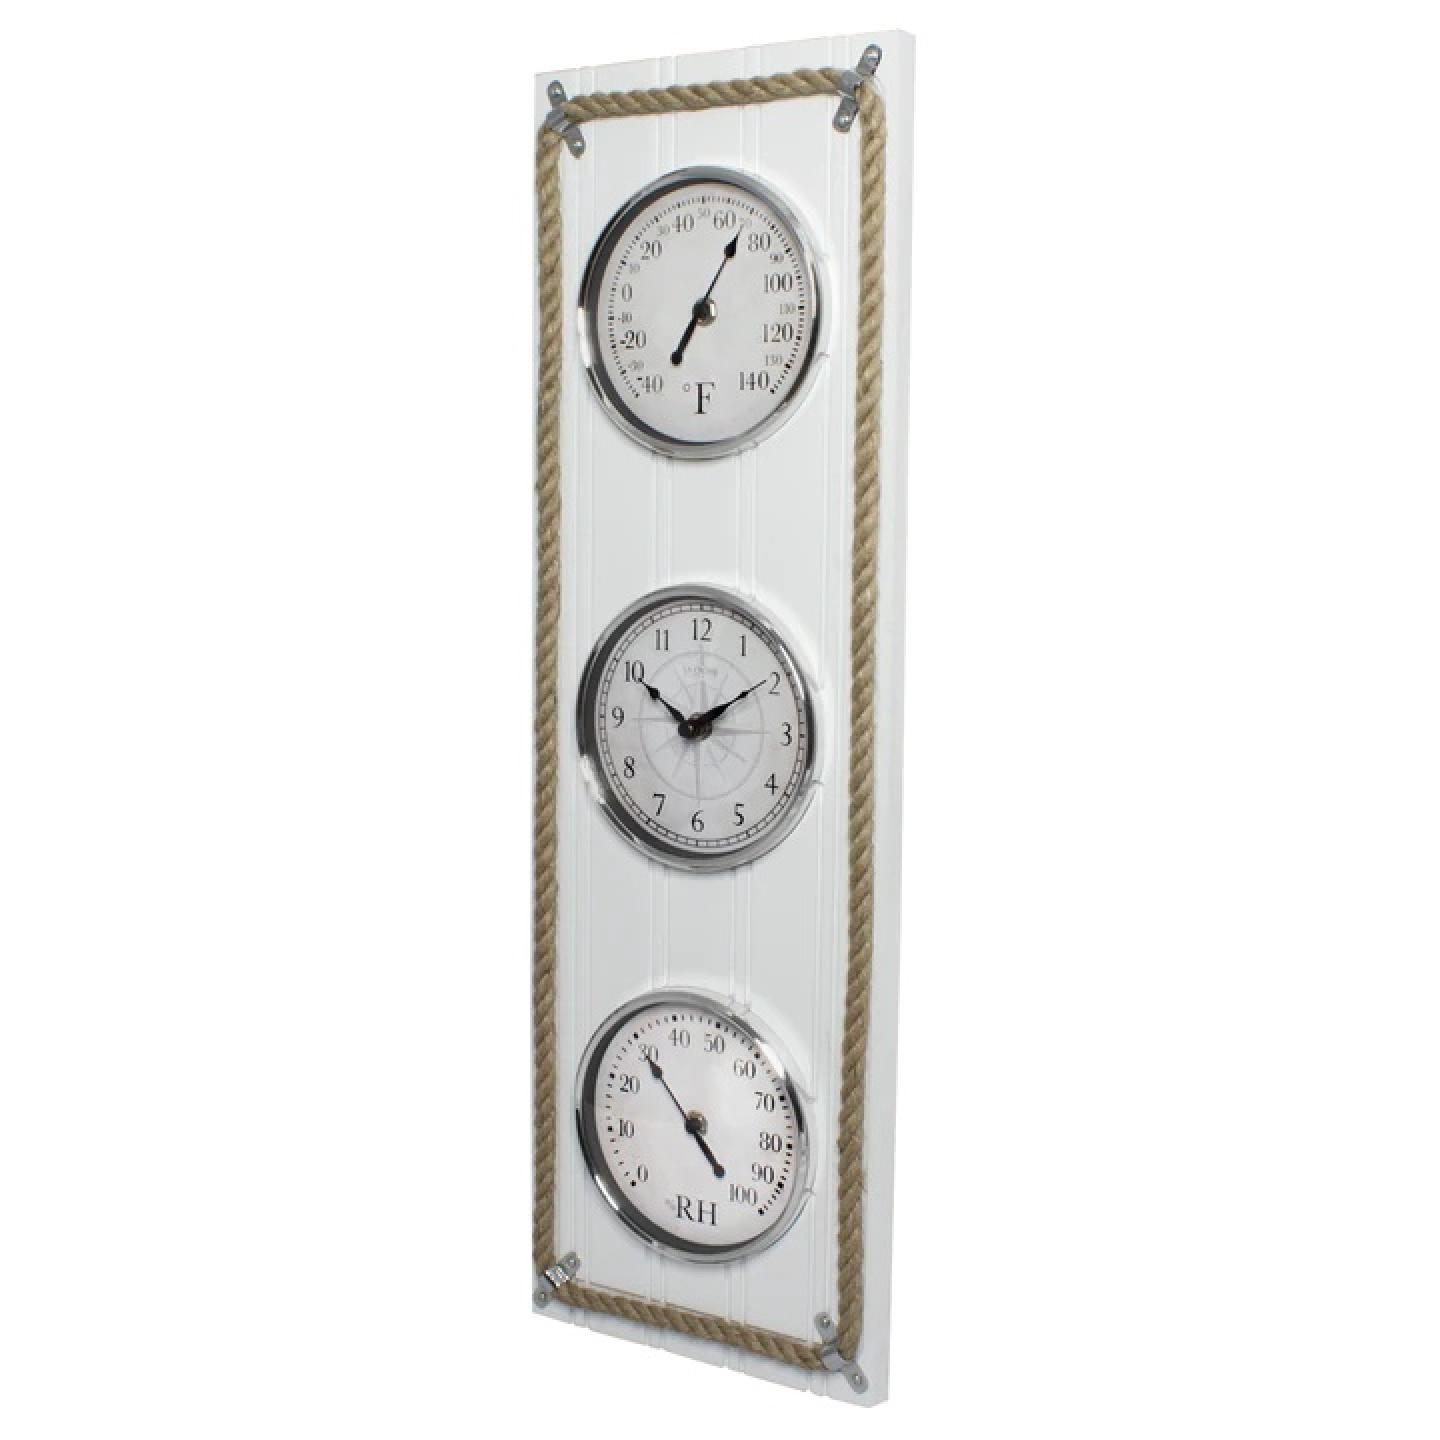 La Crosse Beadboard Clock with Temperature and Humidity